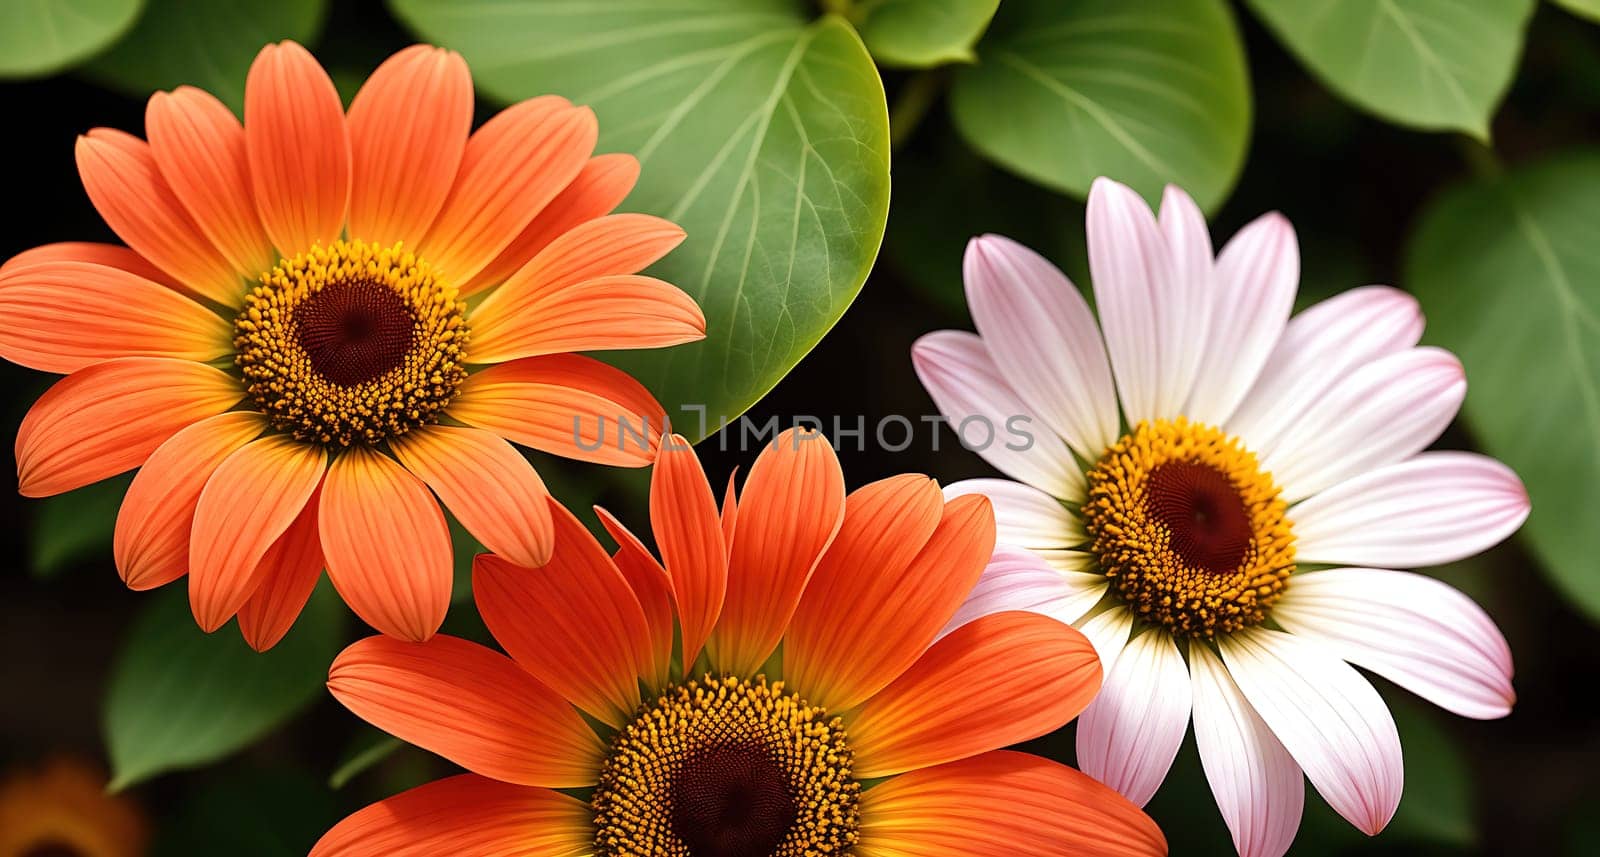 The image shows three colorful flowers with different petal shapes and sizes, surrounded by green leaves.